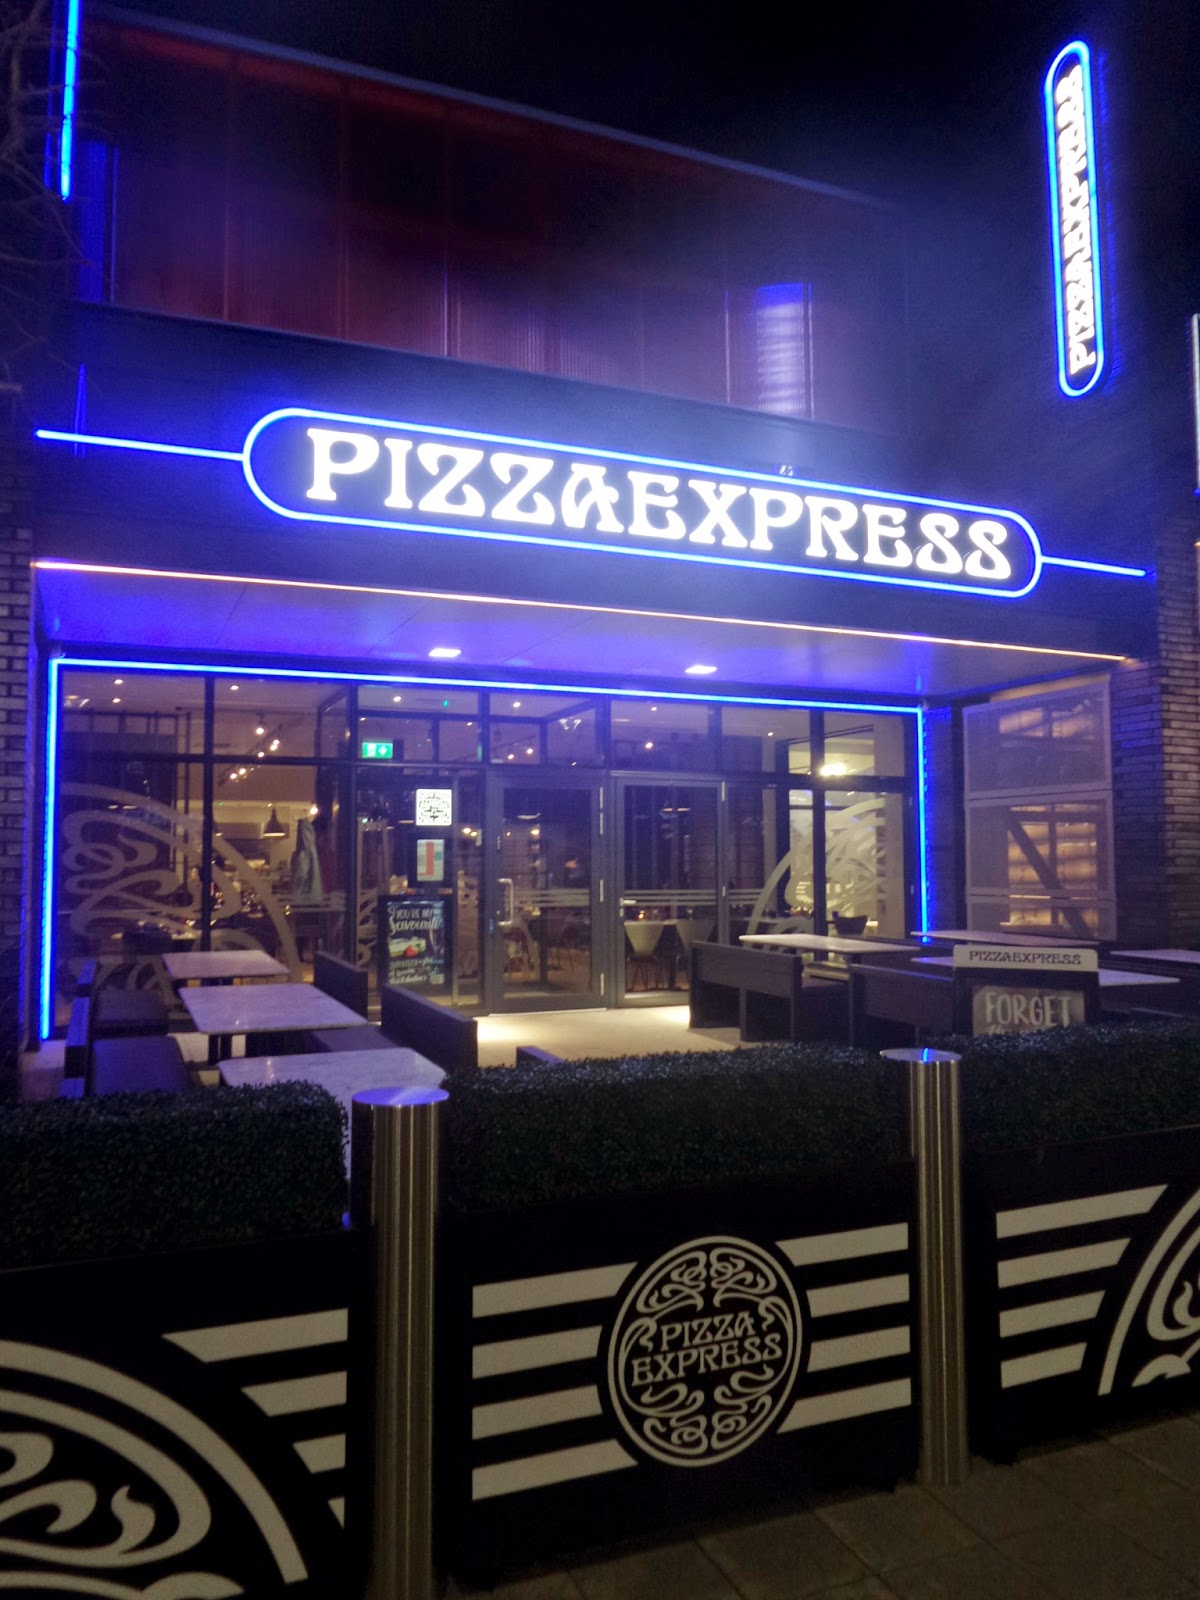 Pizza Express, where the children paid for our meall